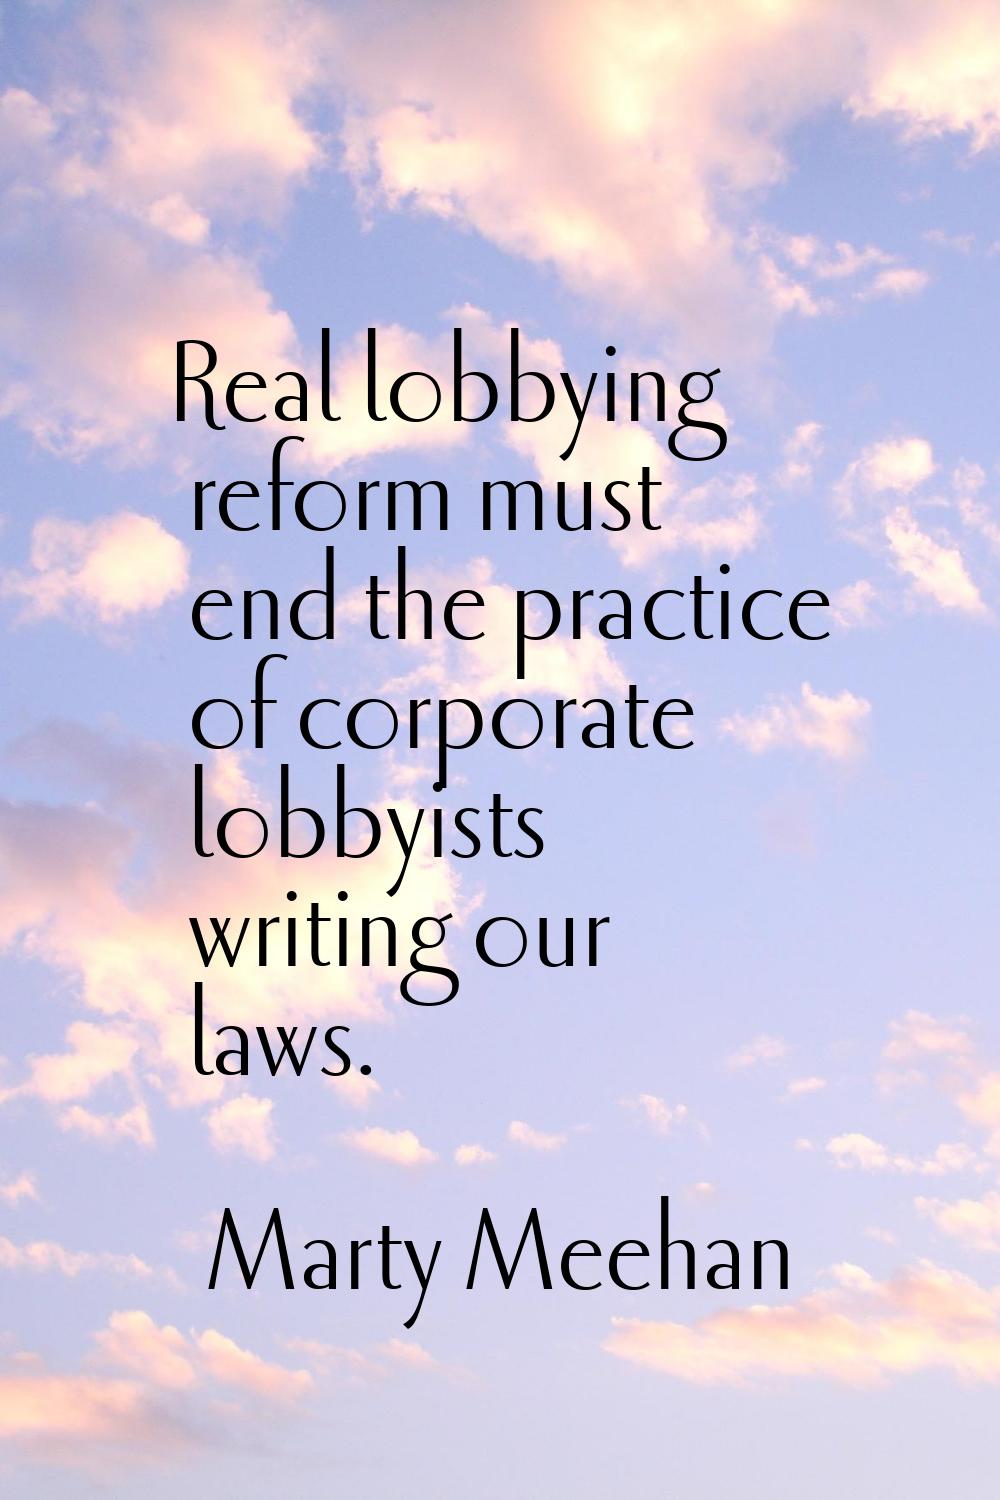 Real lobbying reform must end the practice of corporate lobbyists writing our laws.